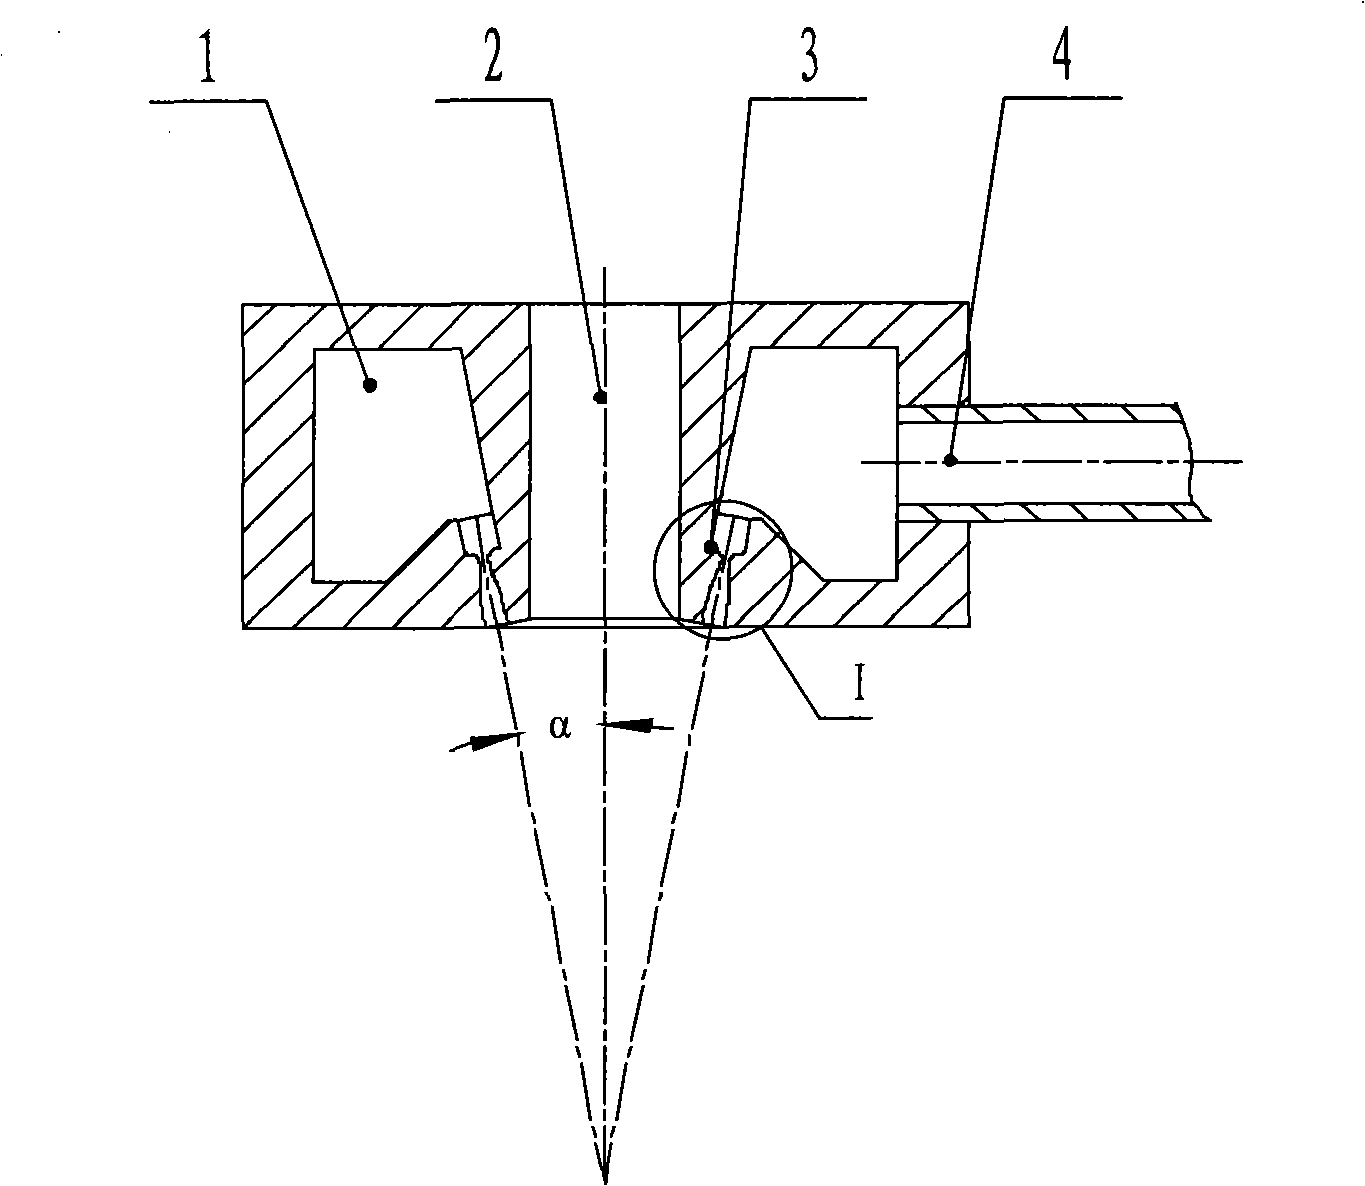 Loop type supersonic nozzle device for atomizing metal gas